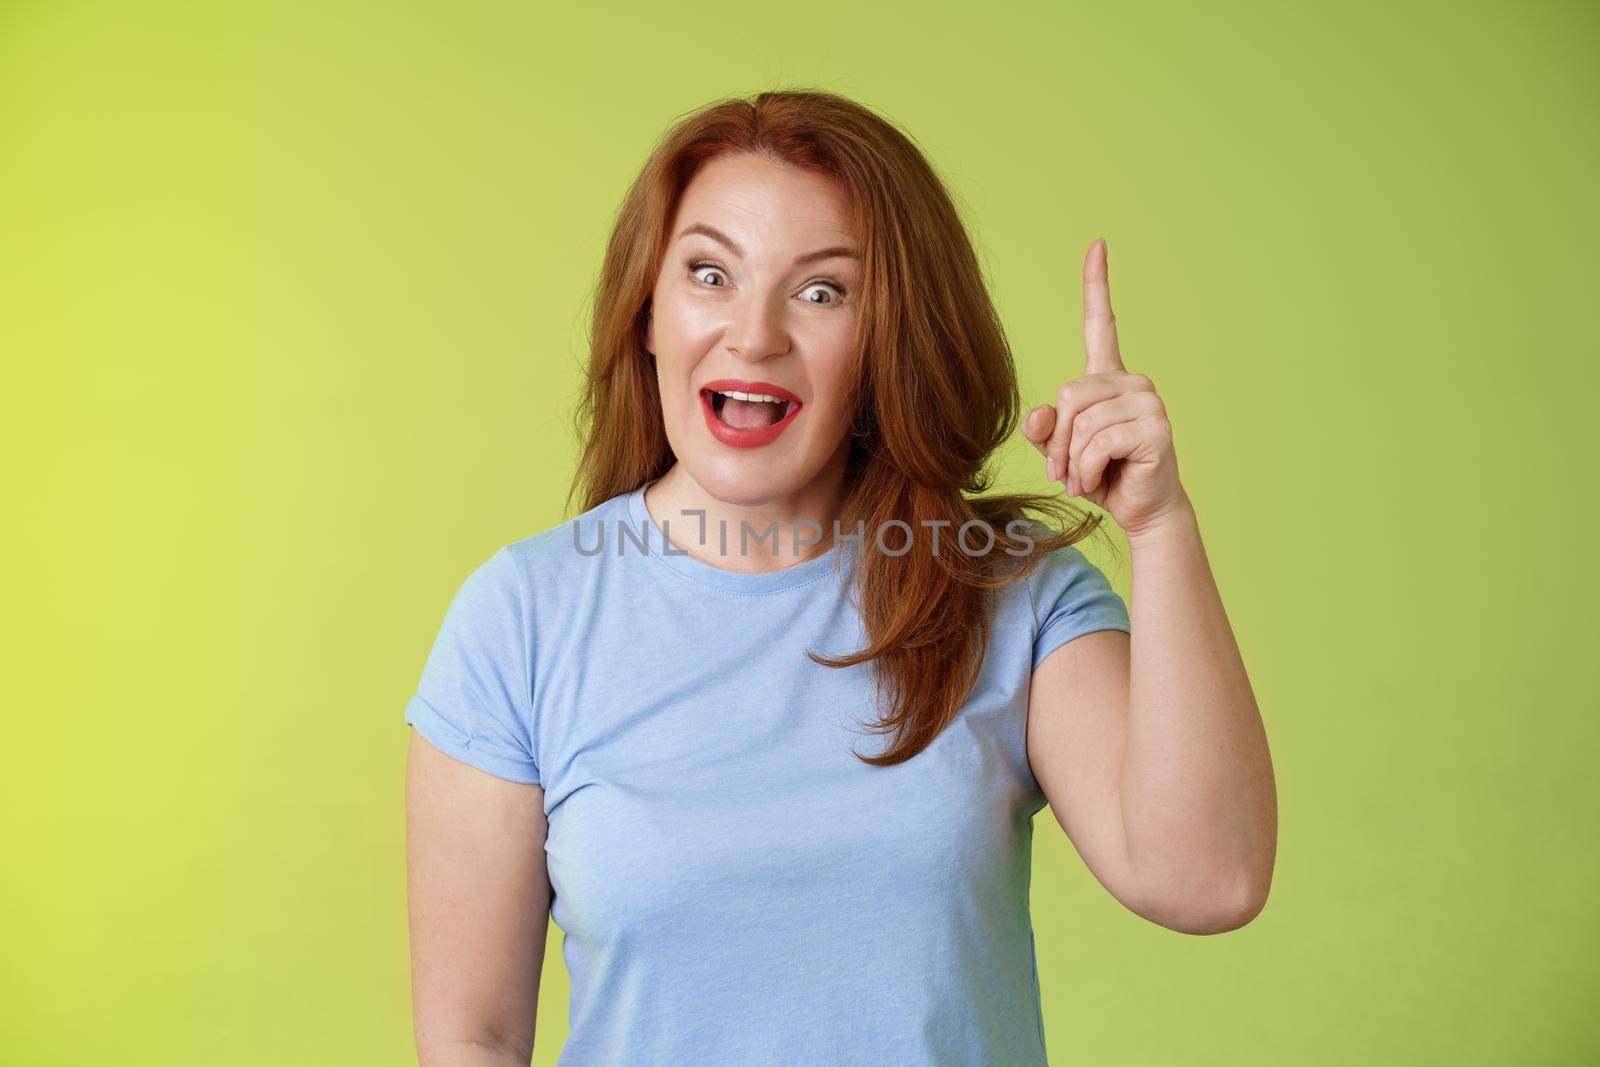 Got excellent idea solution up there. Excited smart creative middle-aged mature woman ginger hair raise index finger eureka pointing top explain offer terms smiling describe cool advertisement.